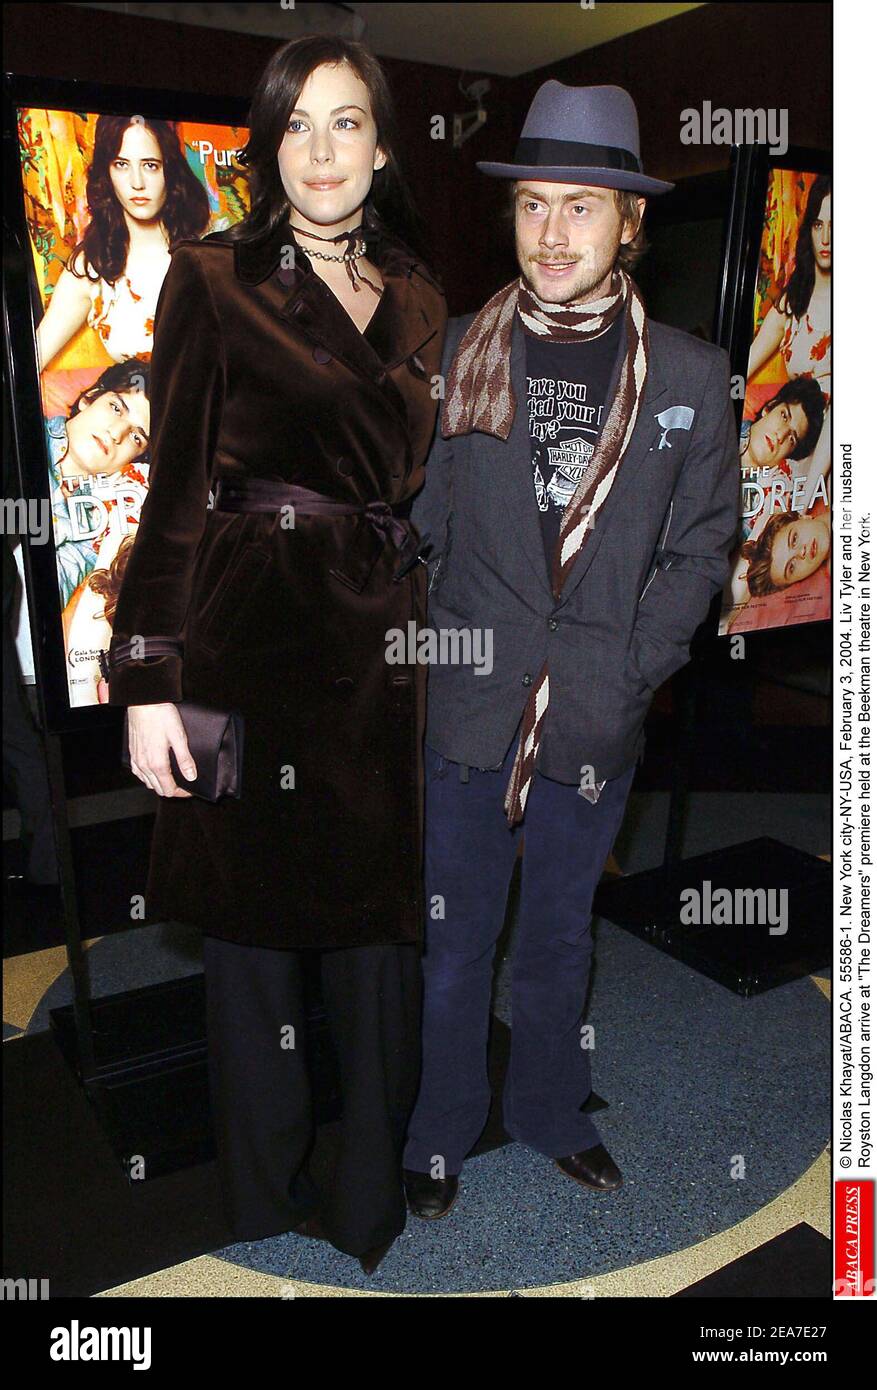 Liv Tyler and her husband Royston Langdon arrive at The Dreamers premiere held at the Beekman theatre in New York, on Tuesday, February 3, 2004. (Pictured : Liv Tyler, Royston Langdon). Photo by Nicolas Khayat/ABACA. Stock Photo